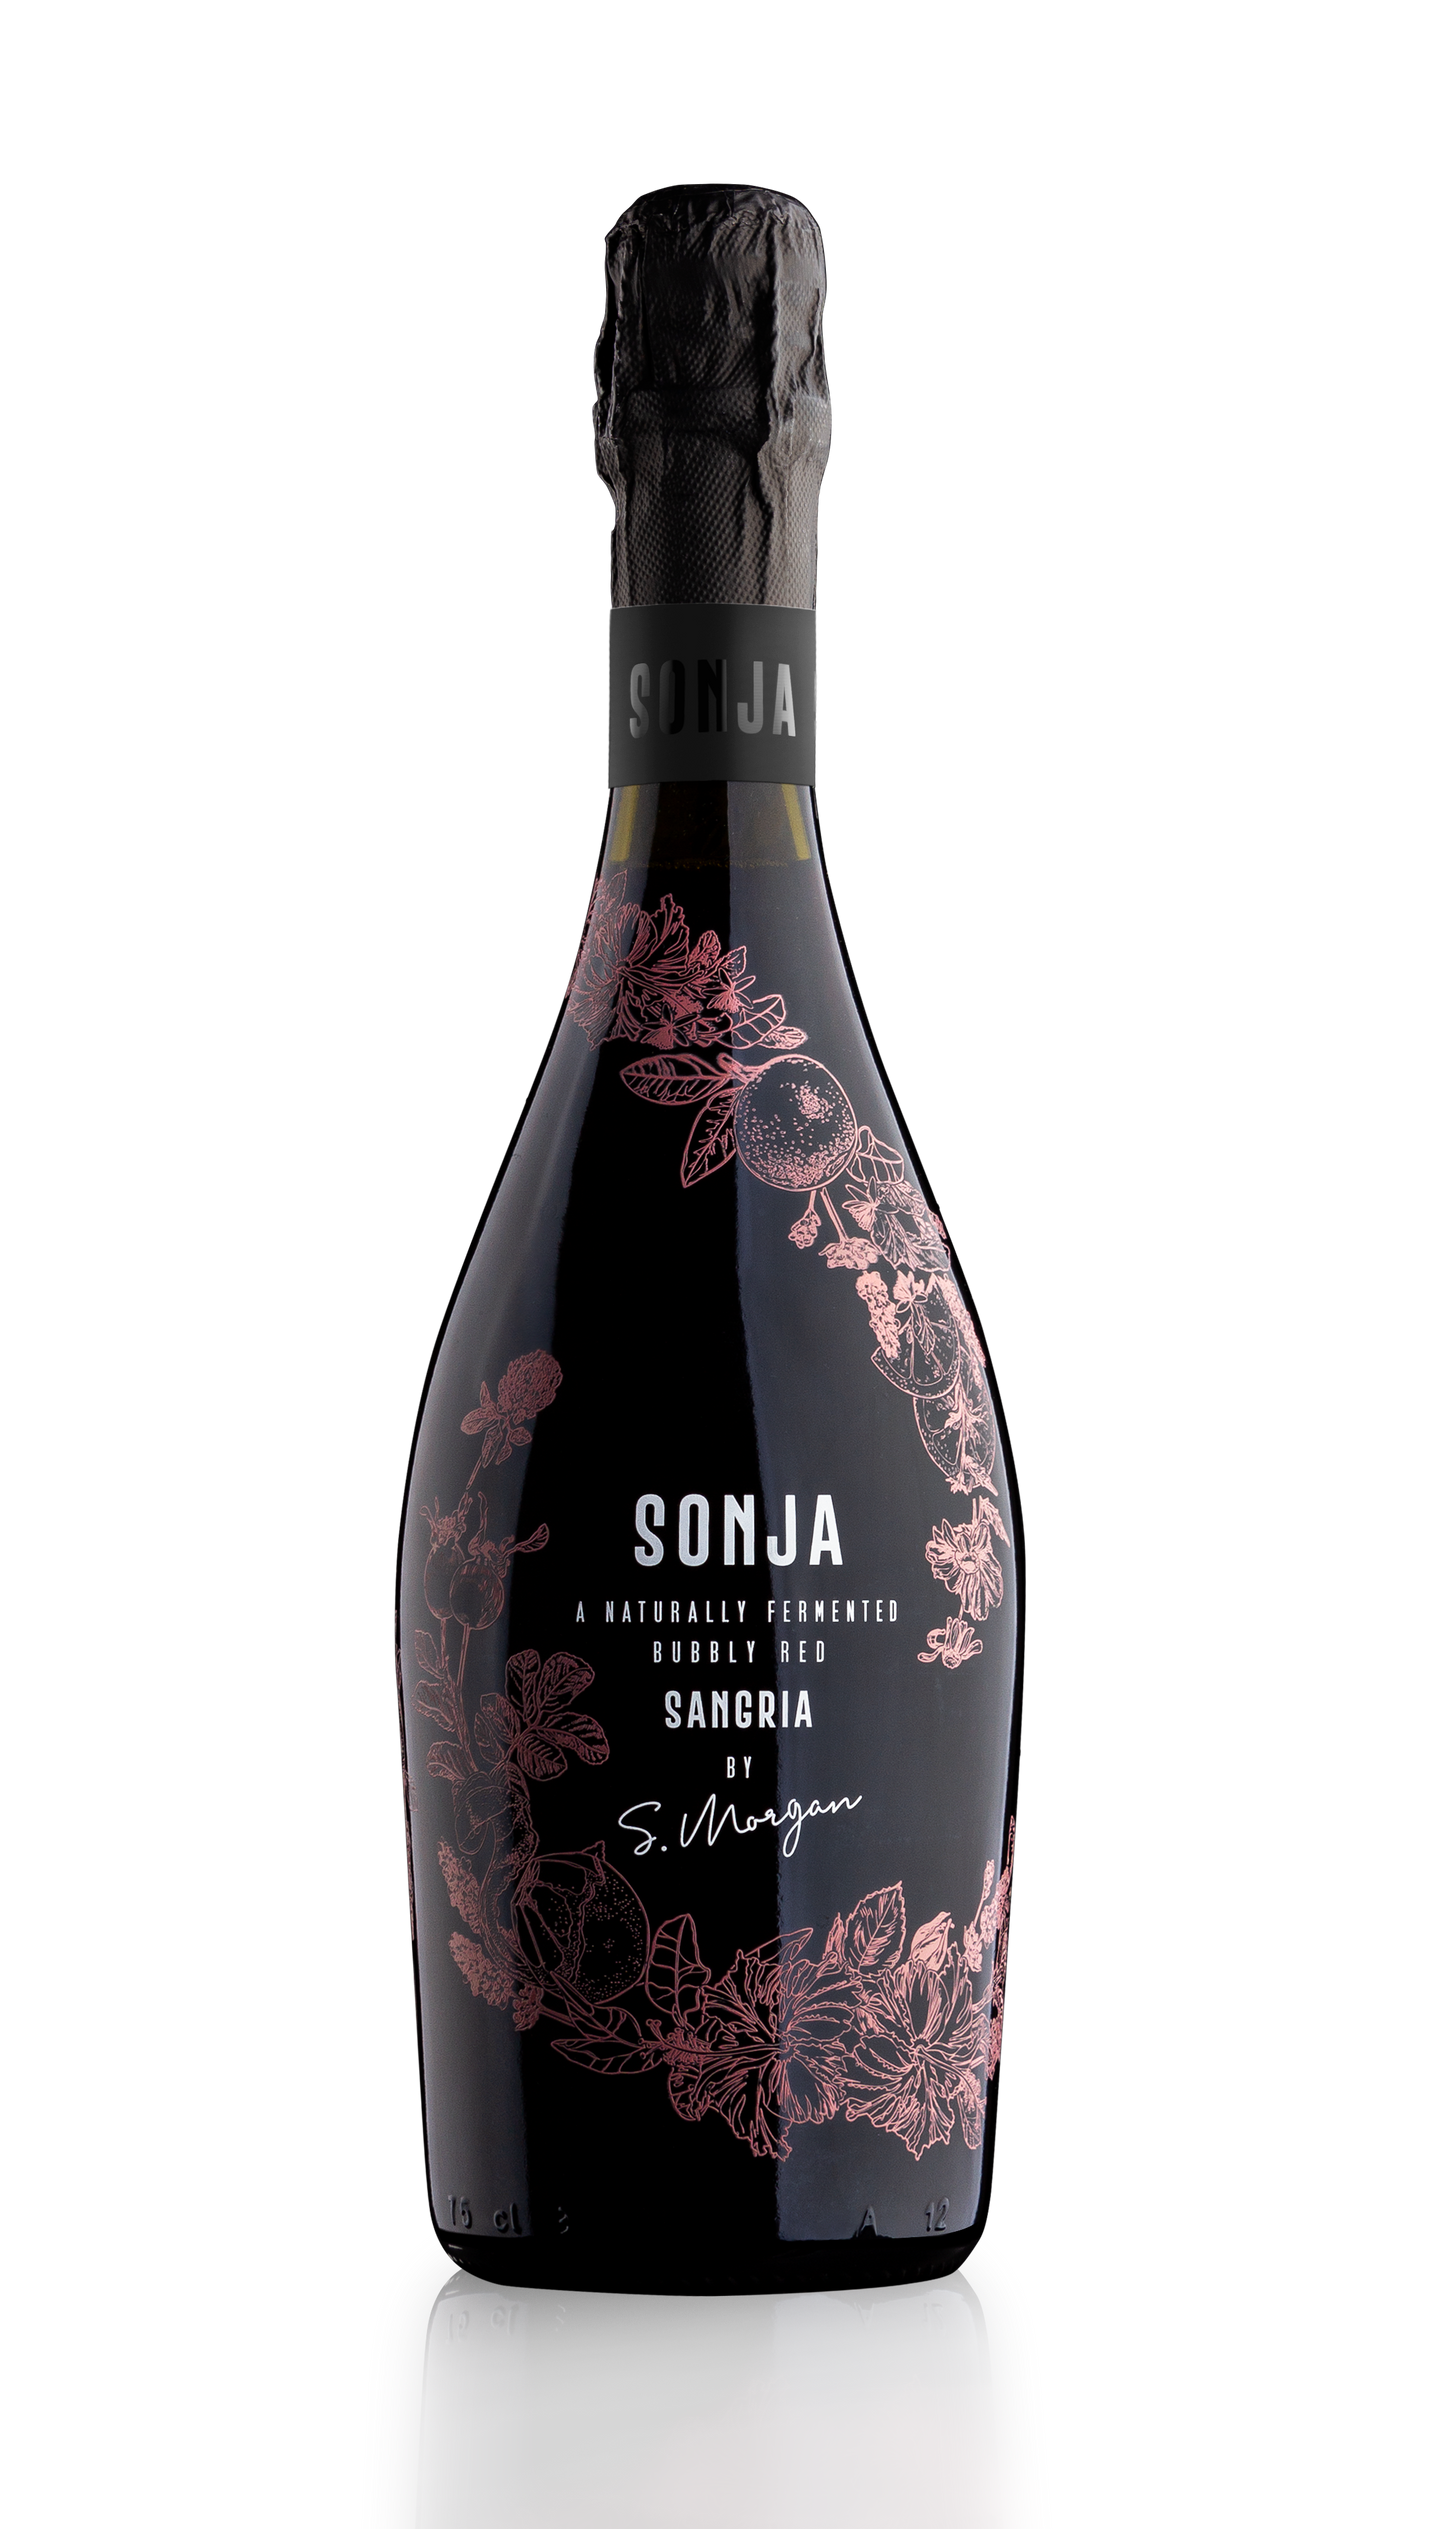 Sonja Sangria Bubbly Red